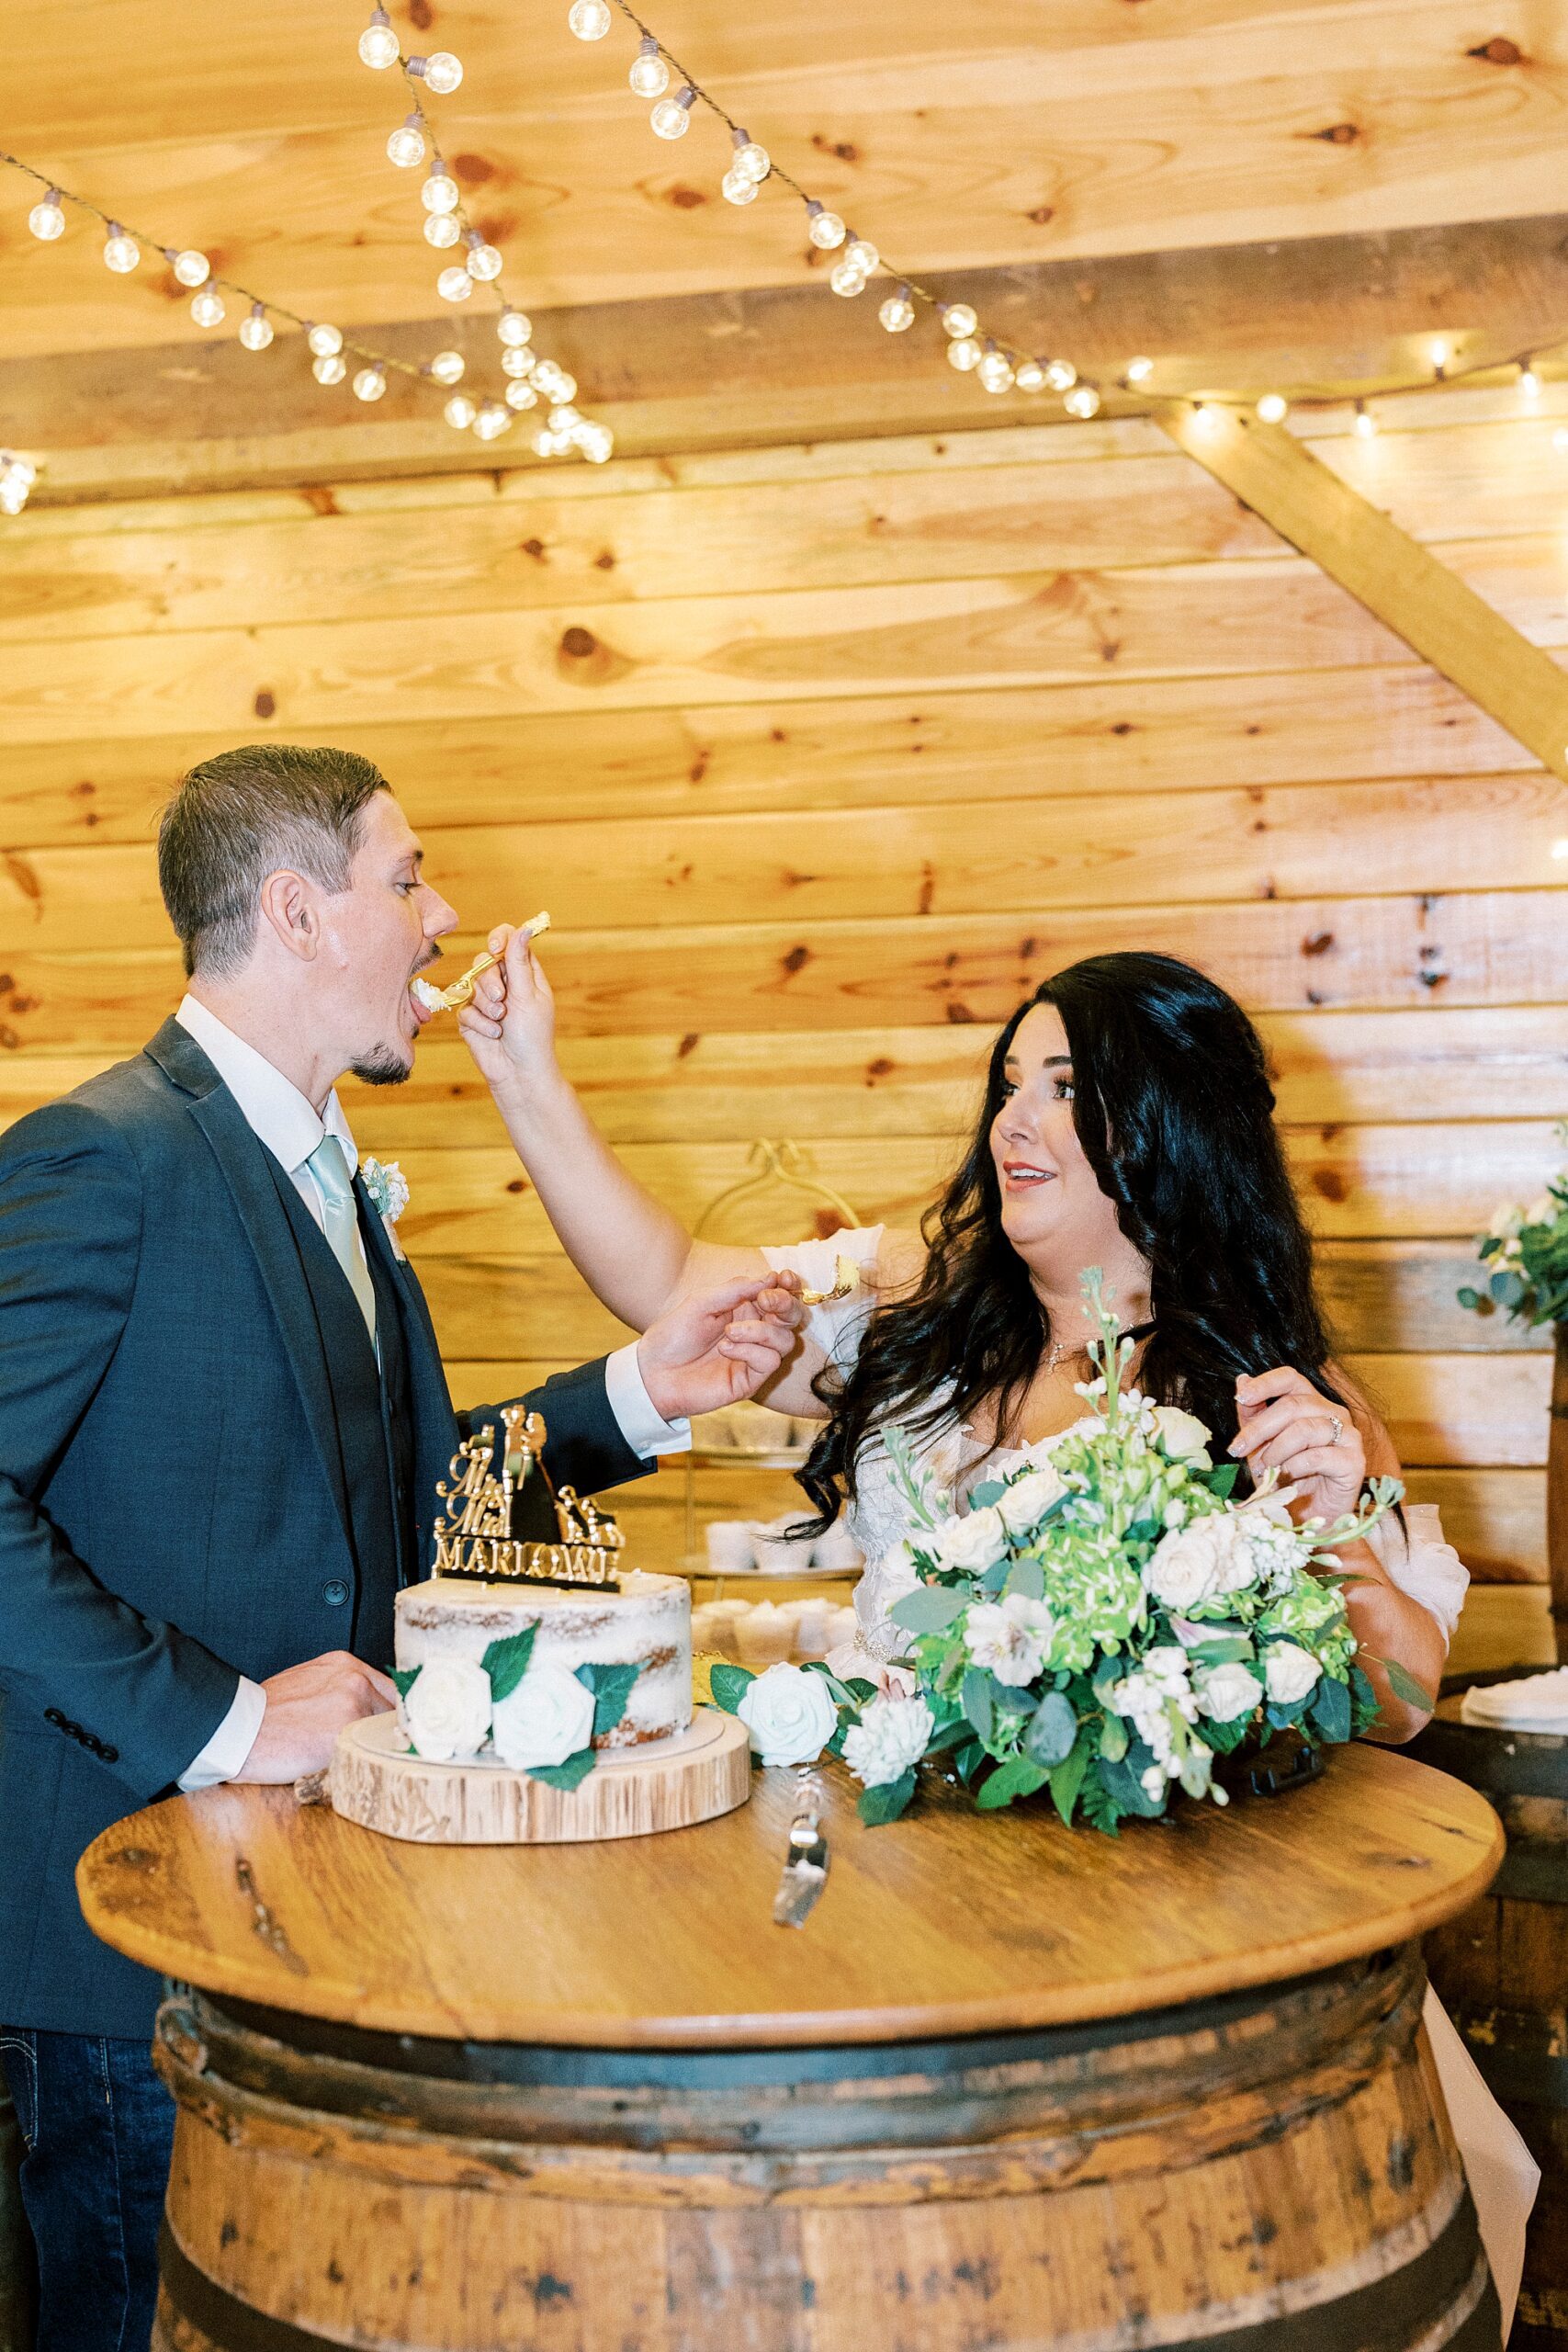 bride feeds groom cupcake during wedding reception at Danner Farms